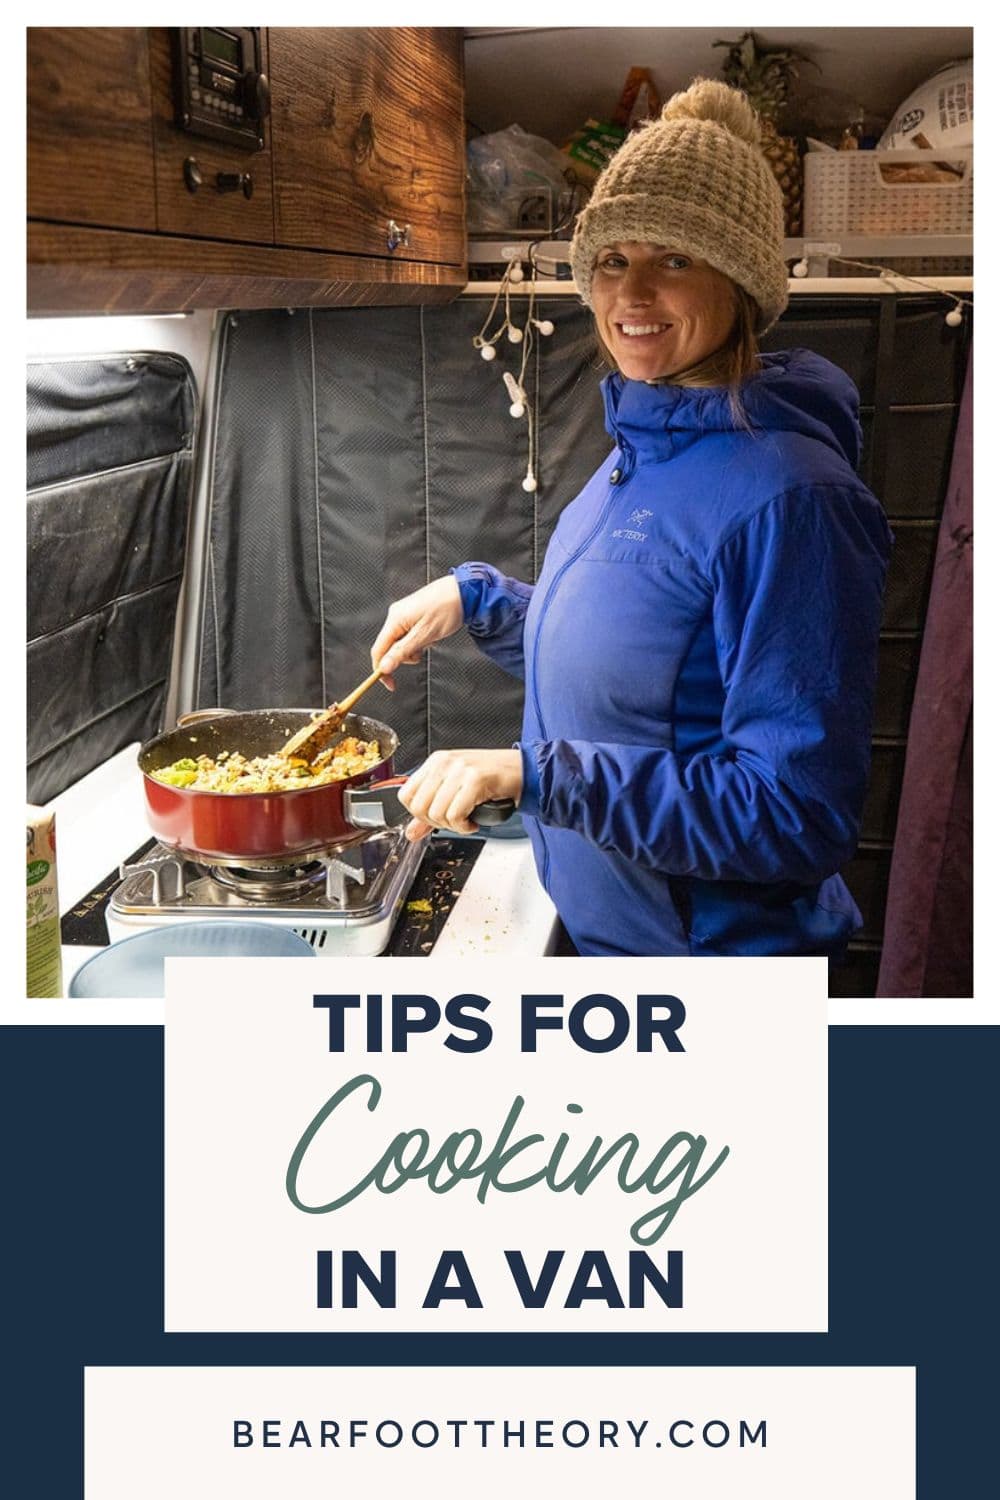 This van life cooking guide shares tips for making easy meals in a camper van including how to plan, save money, and cook in a small space.